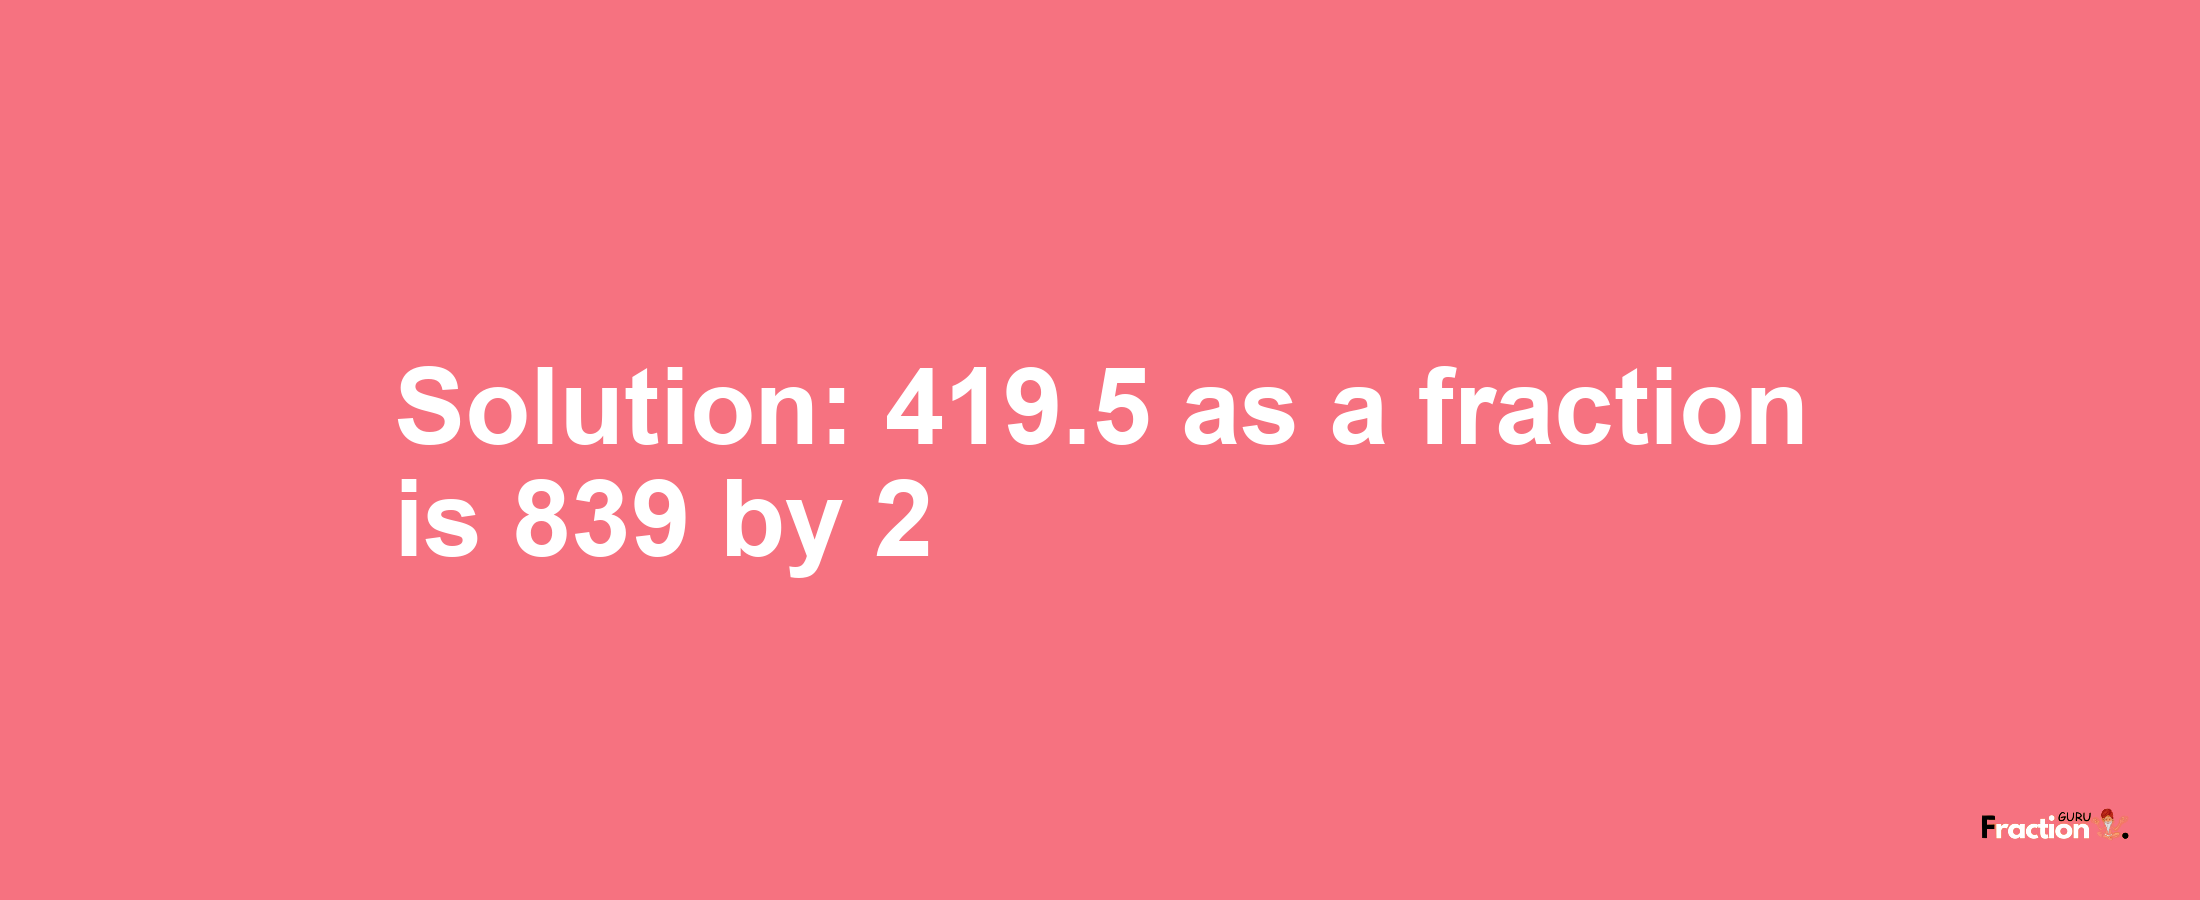 Solution:419.5 as a fraction is 839/2